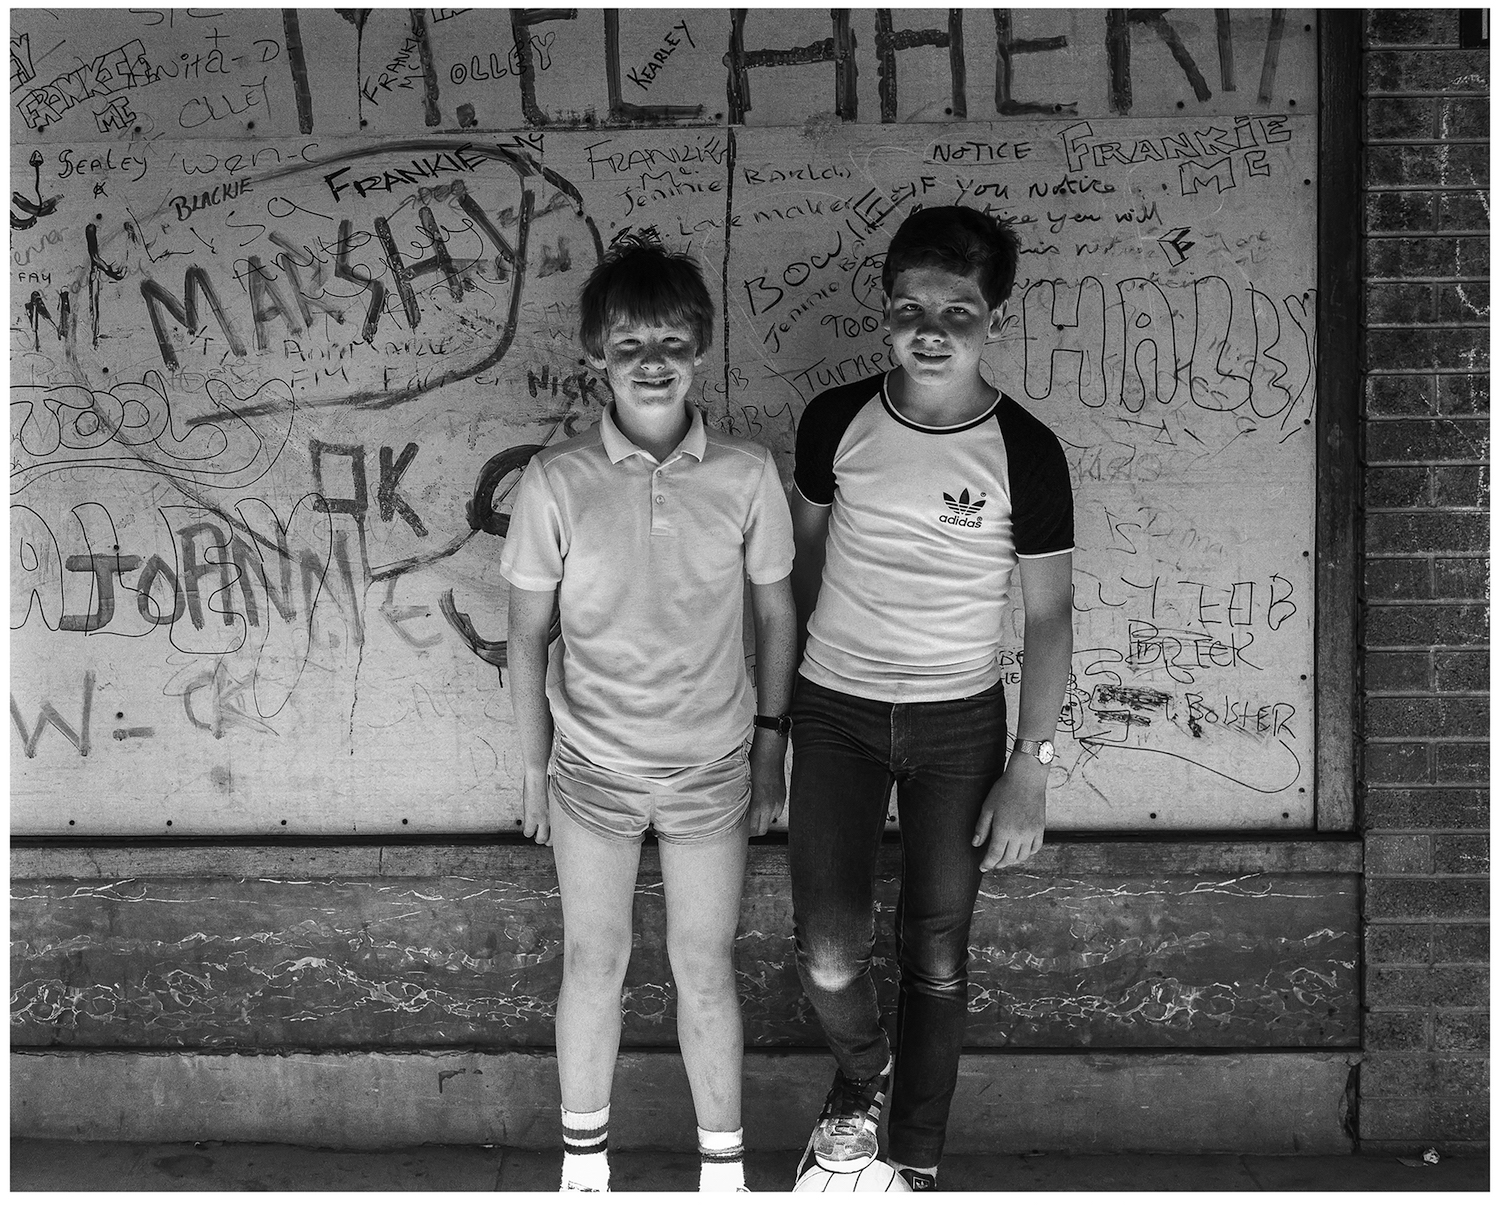 Photograph by Stephen McCoy, From the series Skelmersdale, 1984 - Web Res